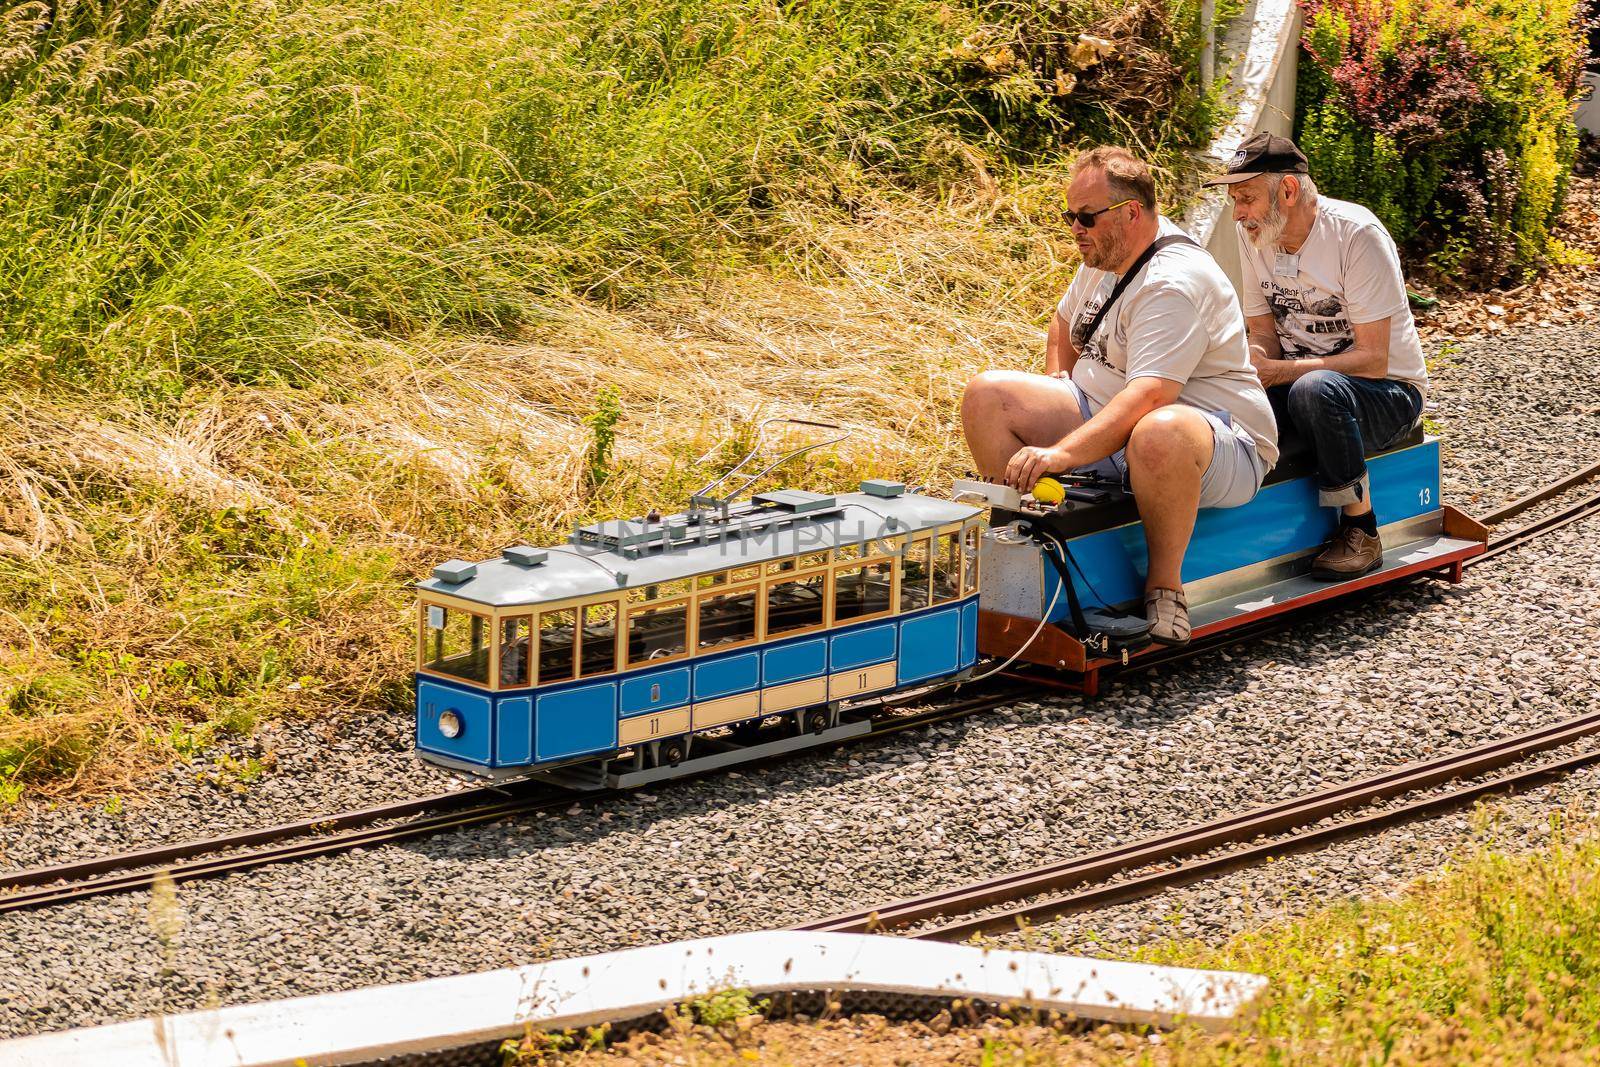 A pair of people drive a model of a tram in a park railway by rostik924